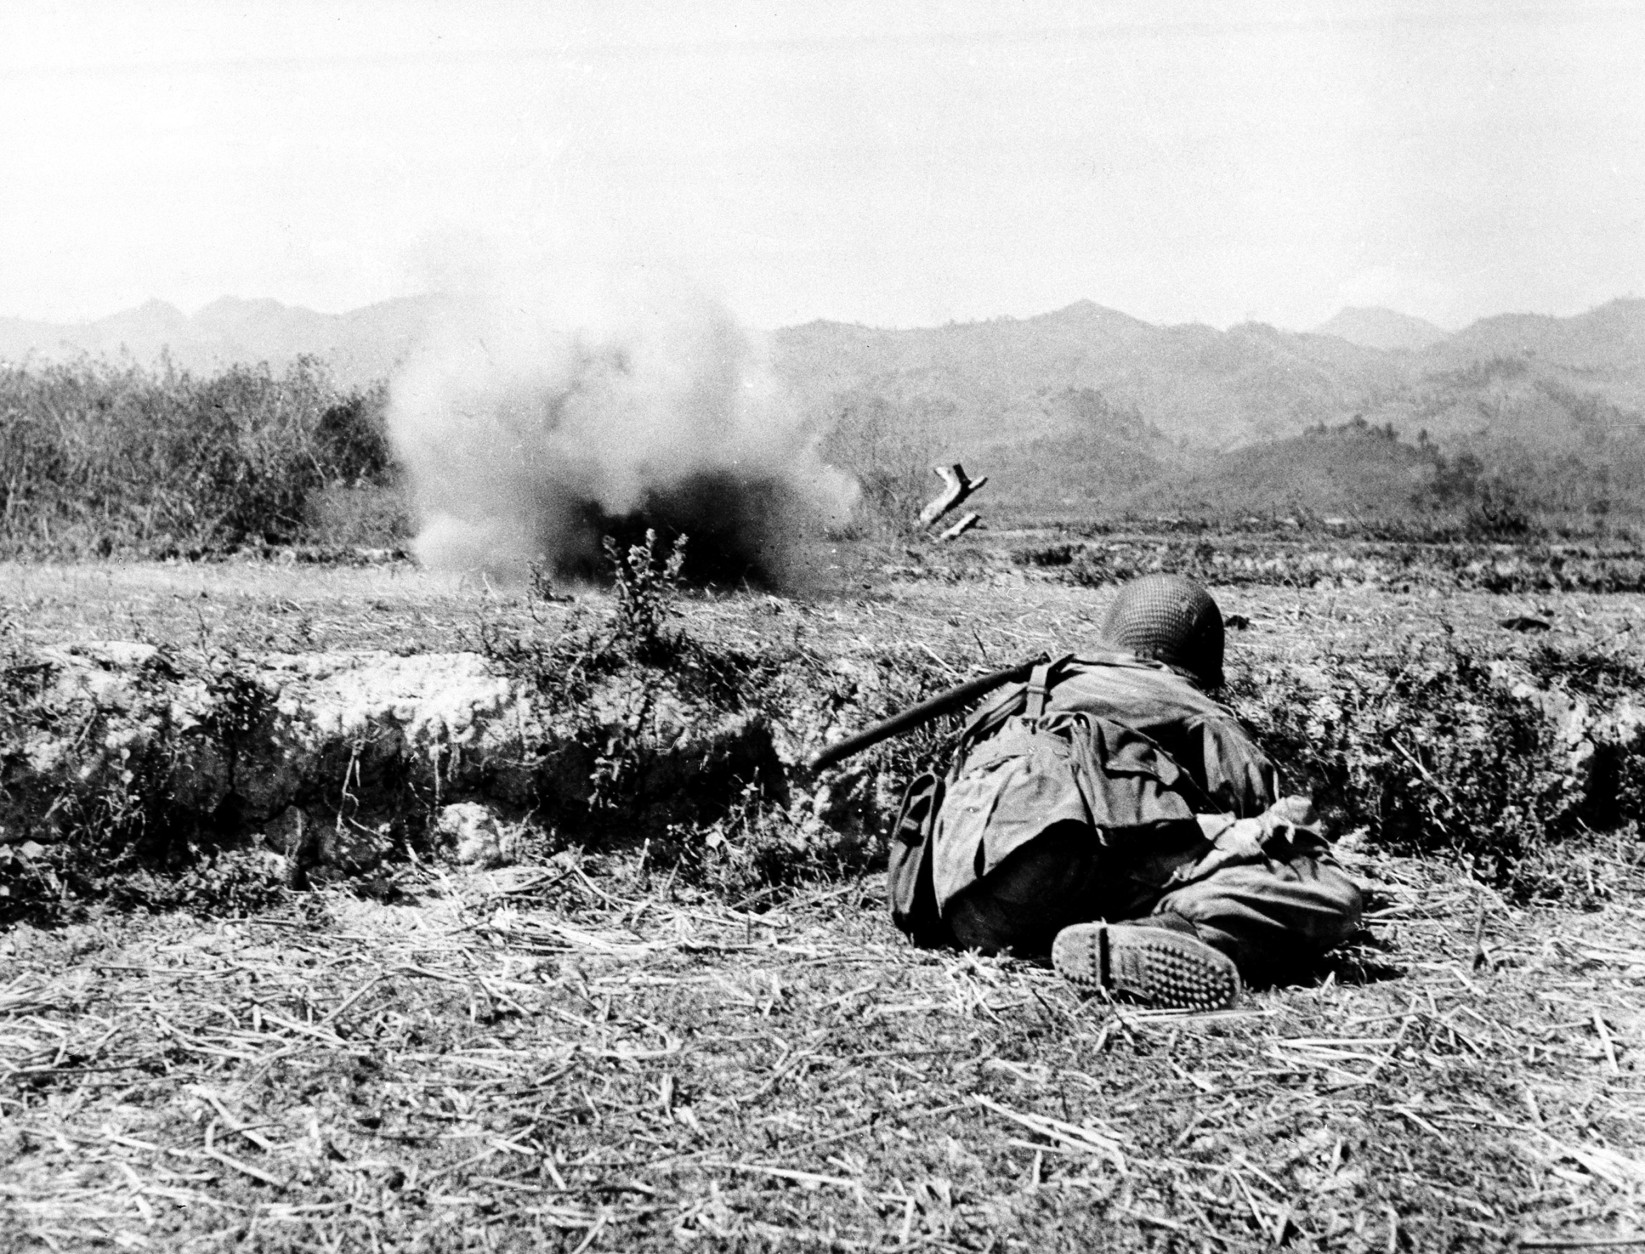 Soldiers of the French-Indochinese Union army, defending the French garrison and stronghold of Dien Bien Phu, are under heavy attack by the Communist Viet Minh forces firing from their positions in the mountains across, on March 24, 1954.  (AP Photo)